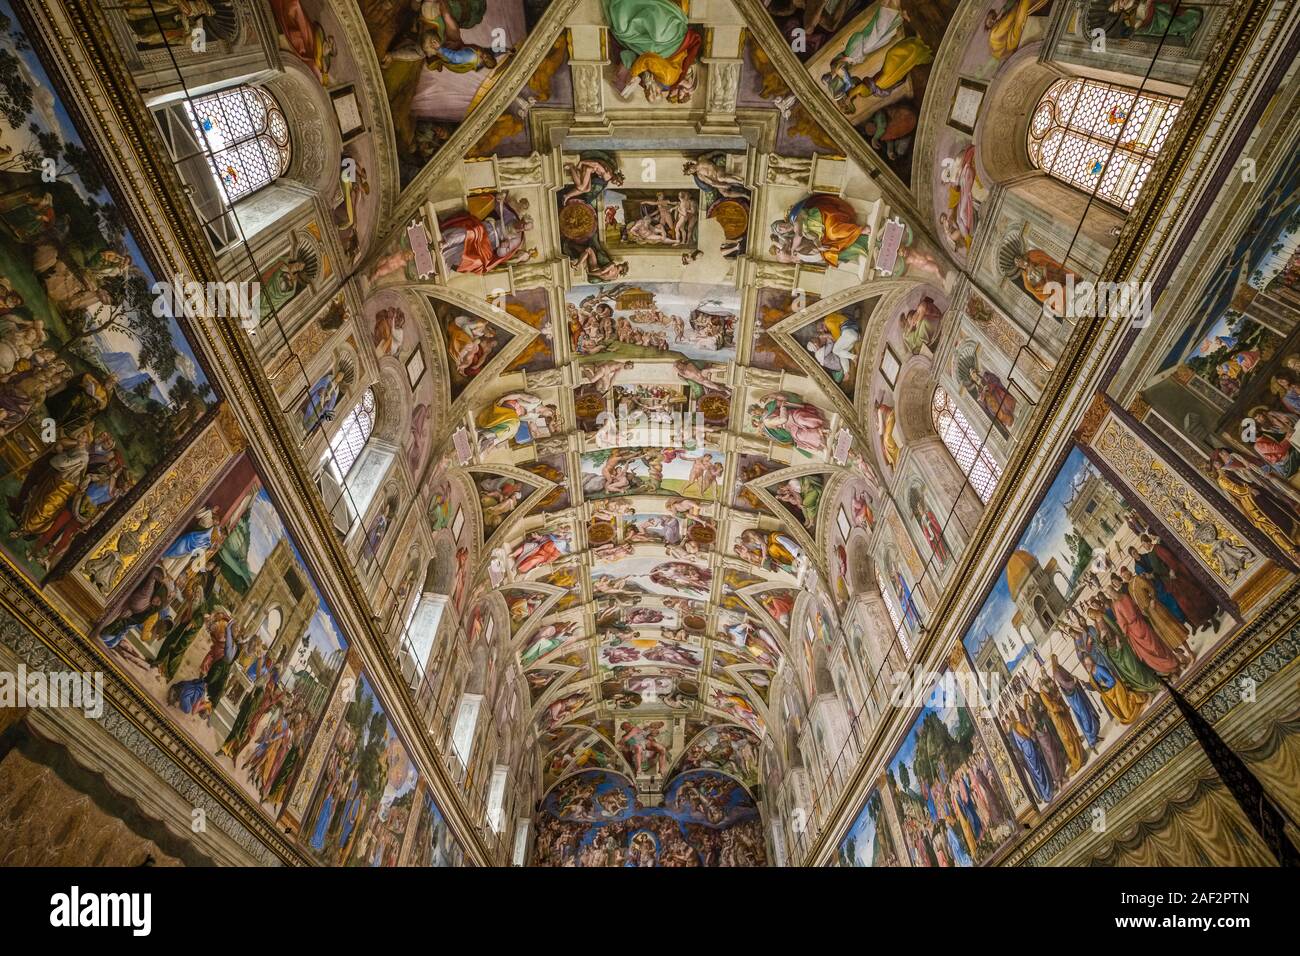 Magnificent interior of the Sistine Chapel, a chapel in the Apostolic Palace inside the Papal Basilica of St. Peter, St. Peter's Basilica Stock Photo